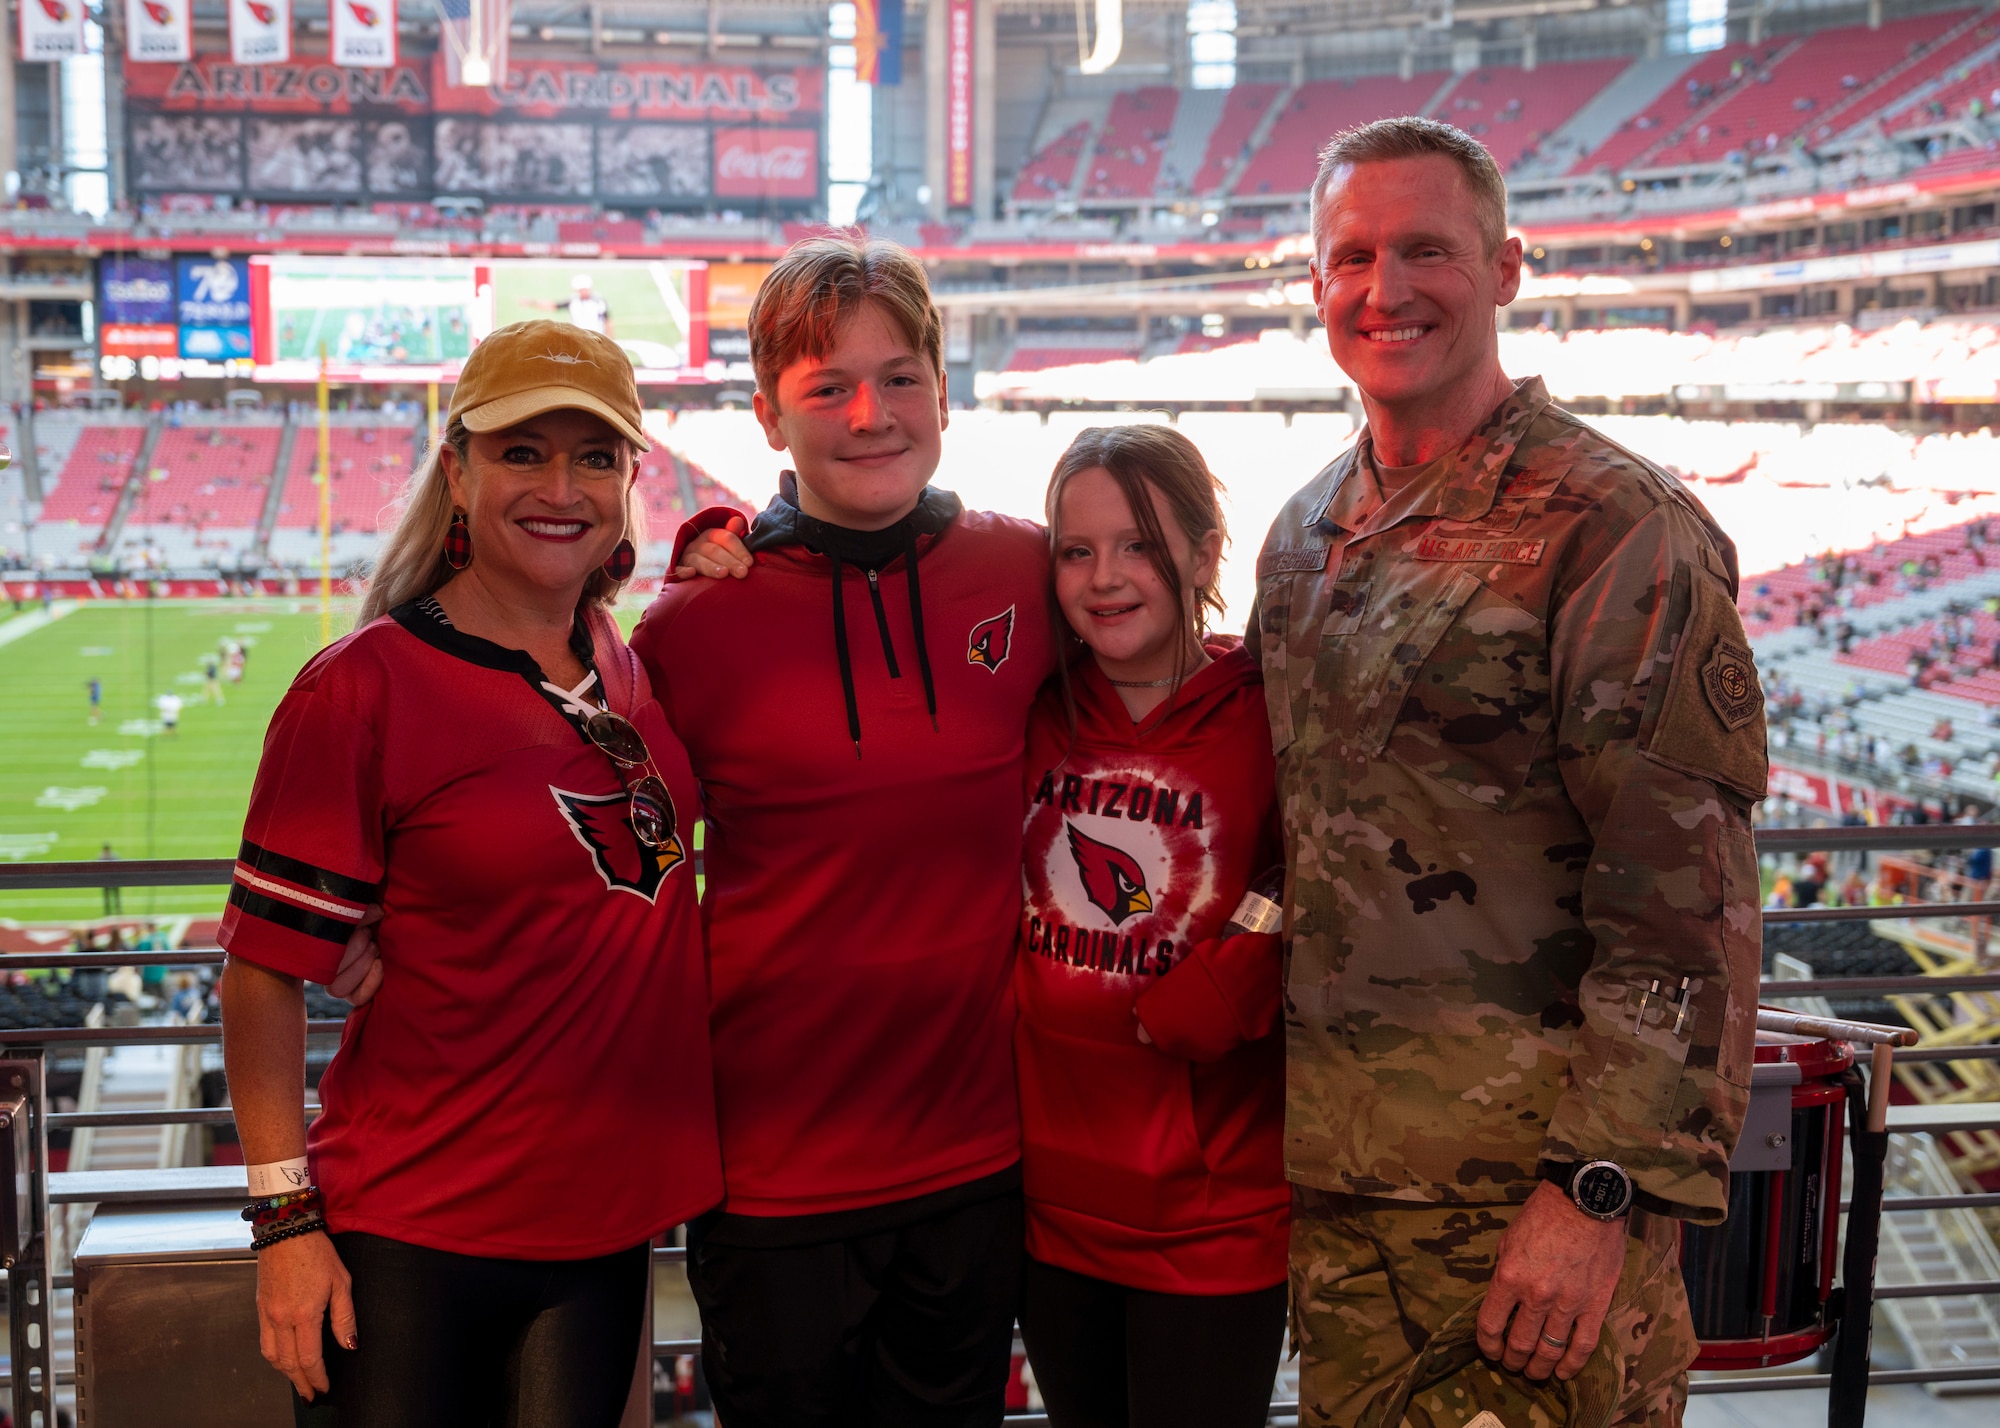 Luke  Military members participate Salute to Service game at